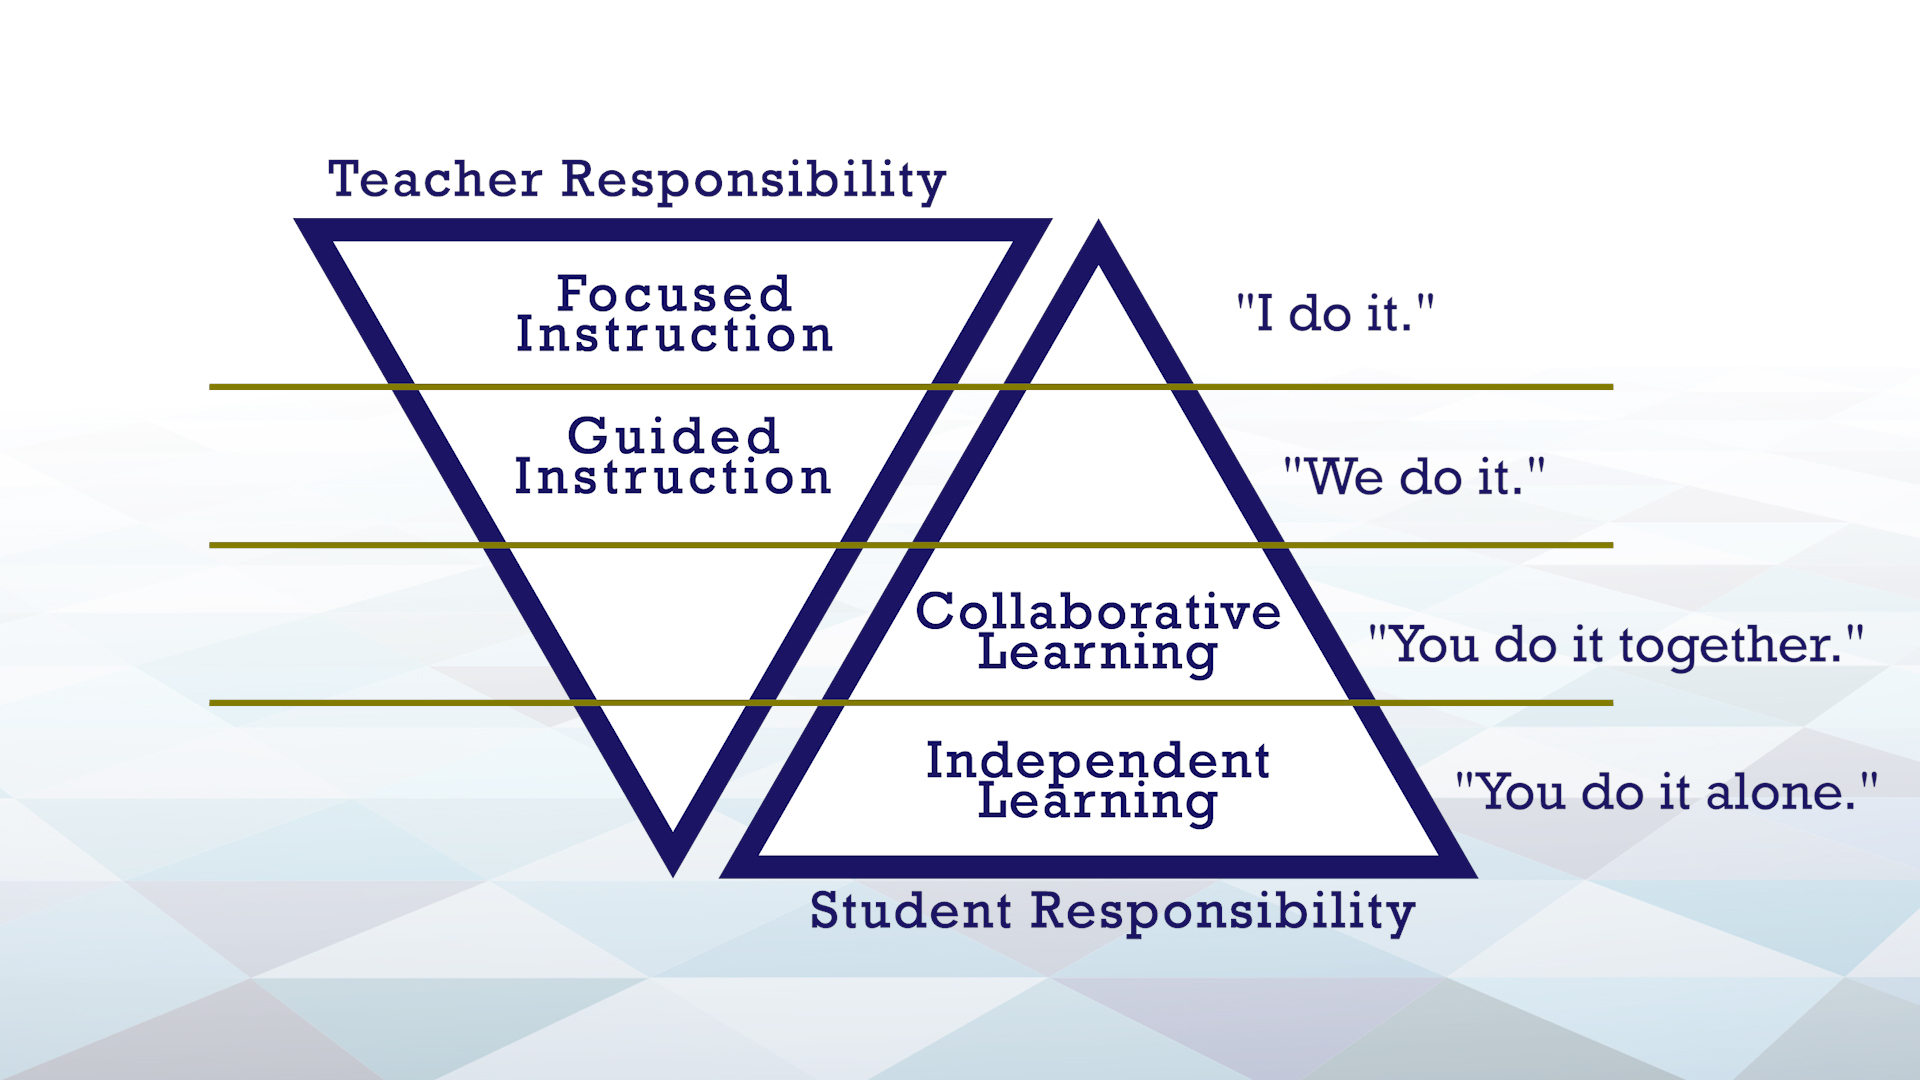 GRR image of two triangles side by side, one inverted, representing teacher and student responsibility